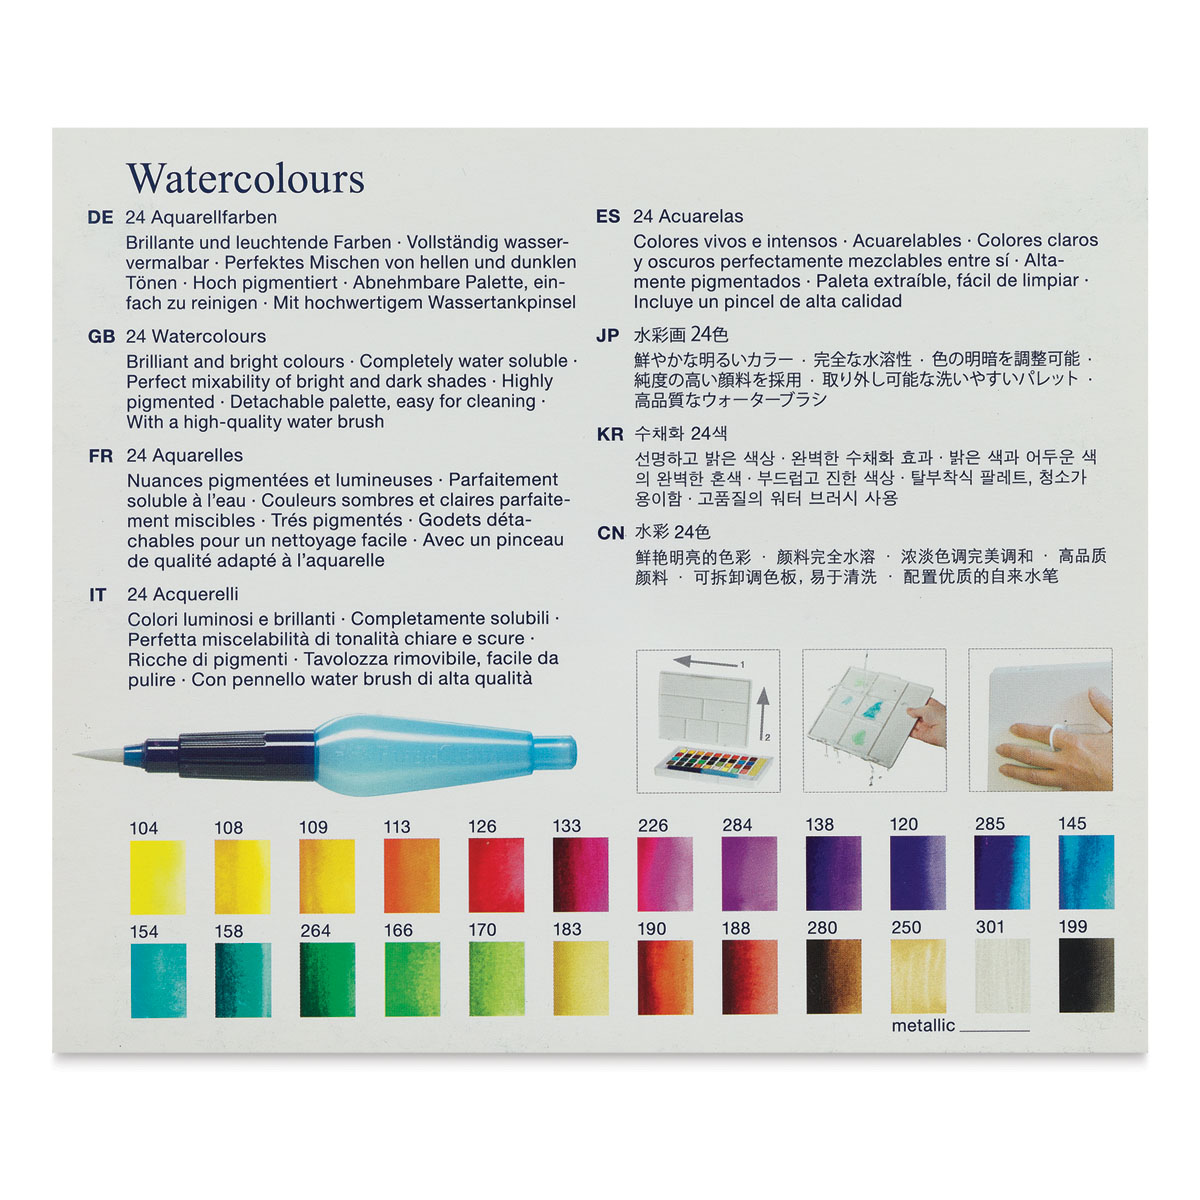 Complete Watercolor Paint Set with Watercolor Paper – KEFF Creations